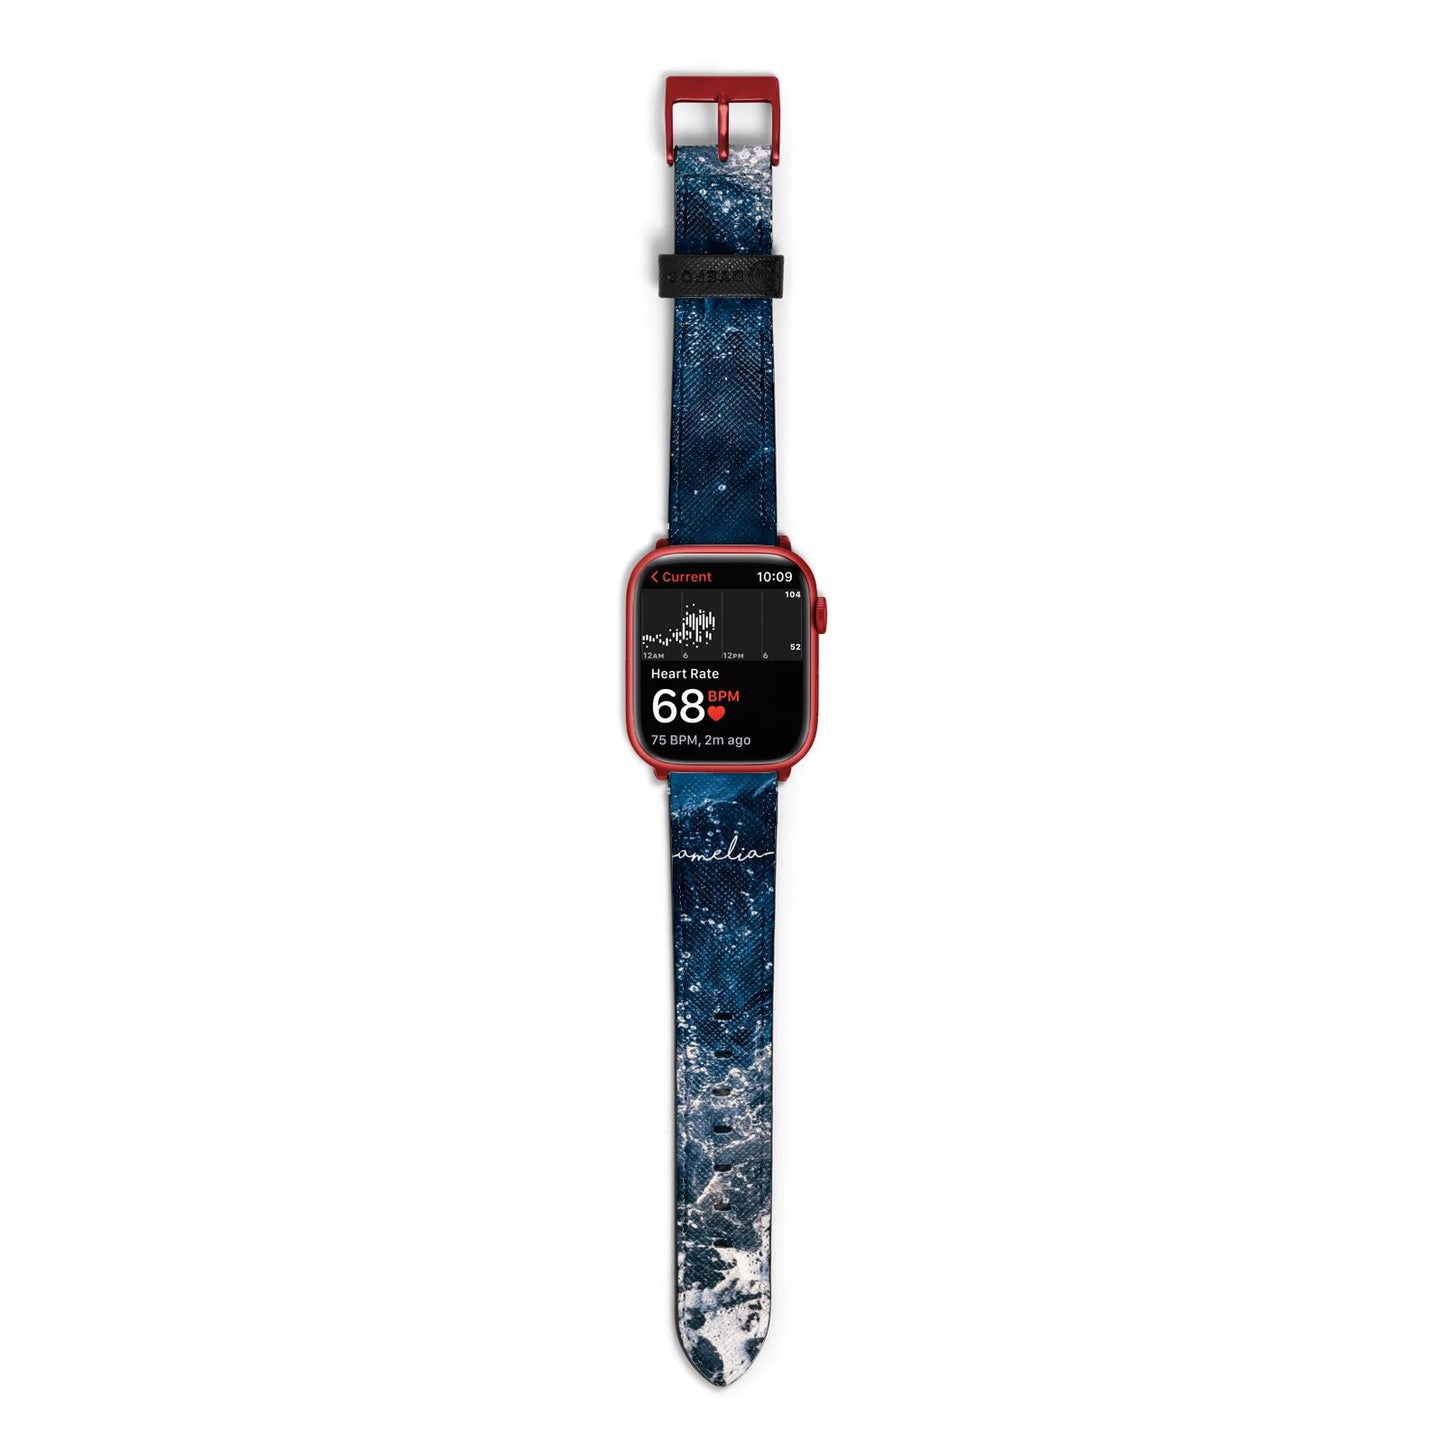 Custom Sea Apple Watch Strap Size 38mm with Red Hardware